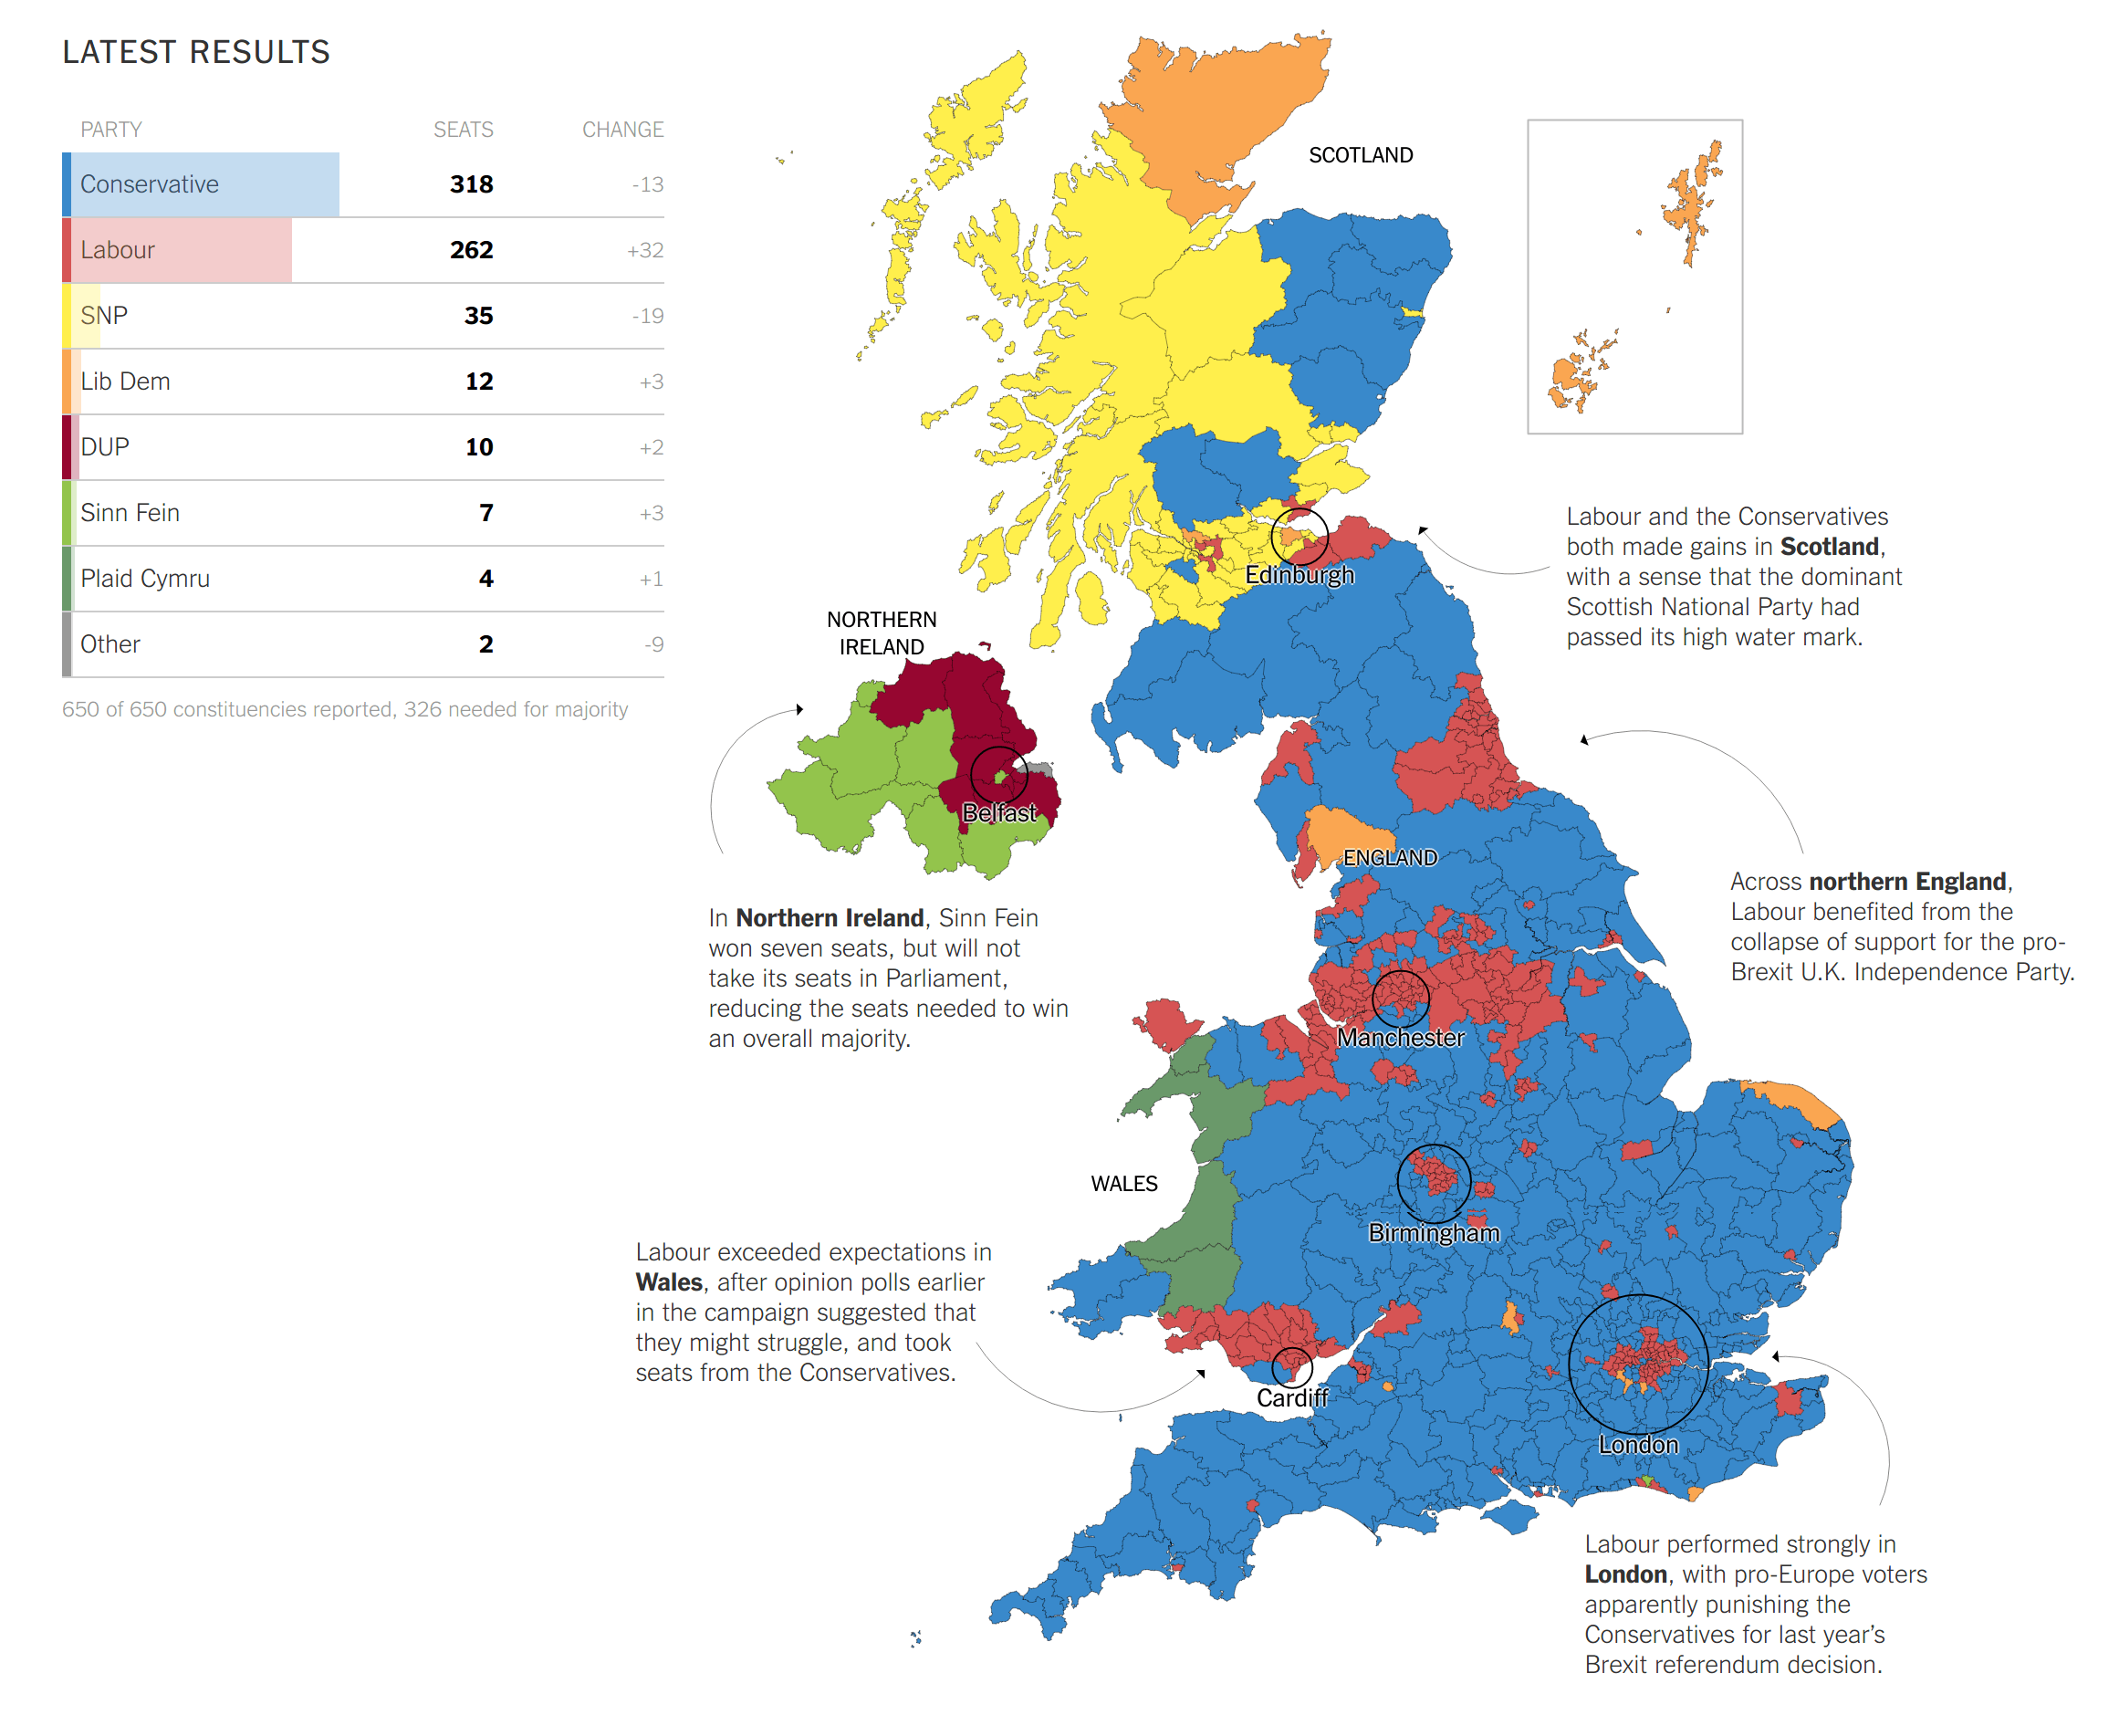 How Britain Voted